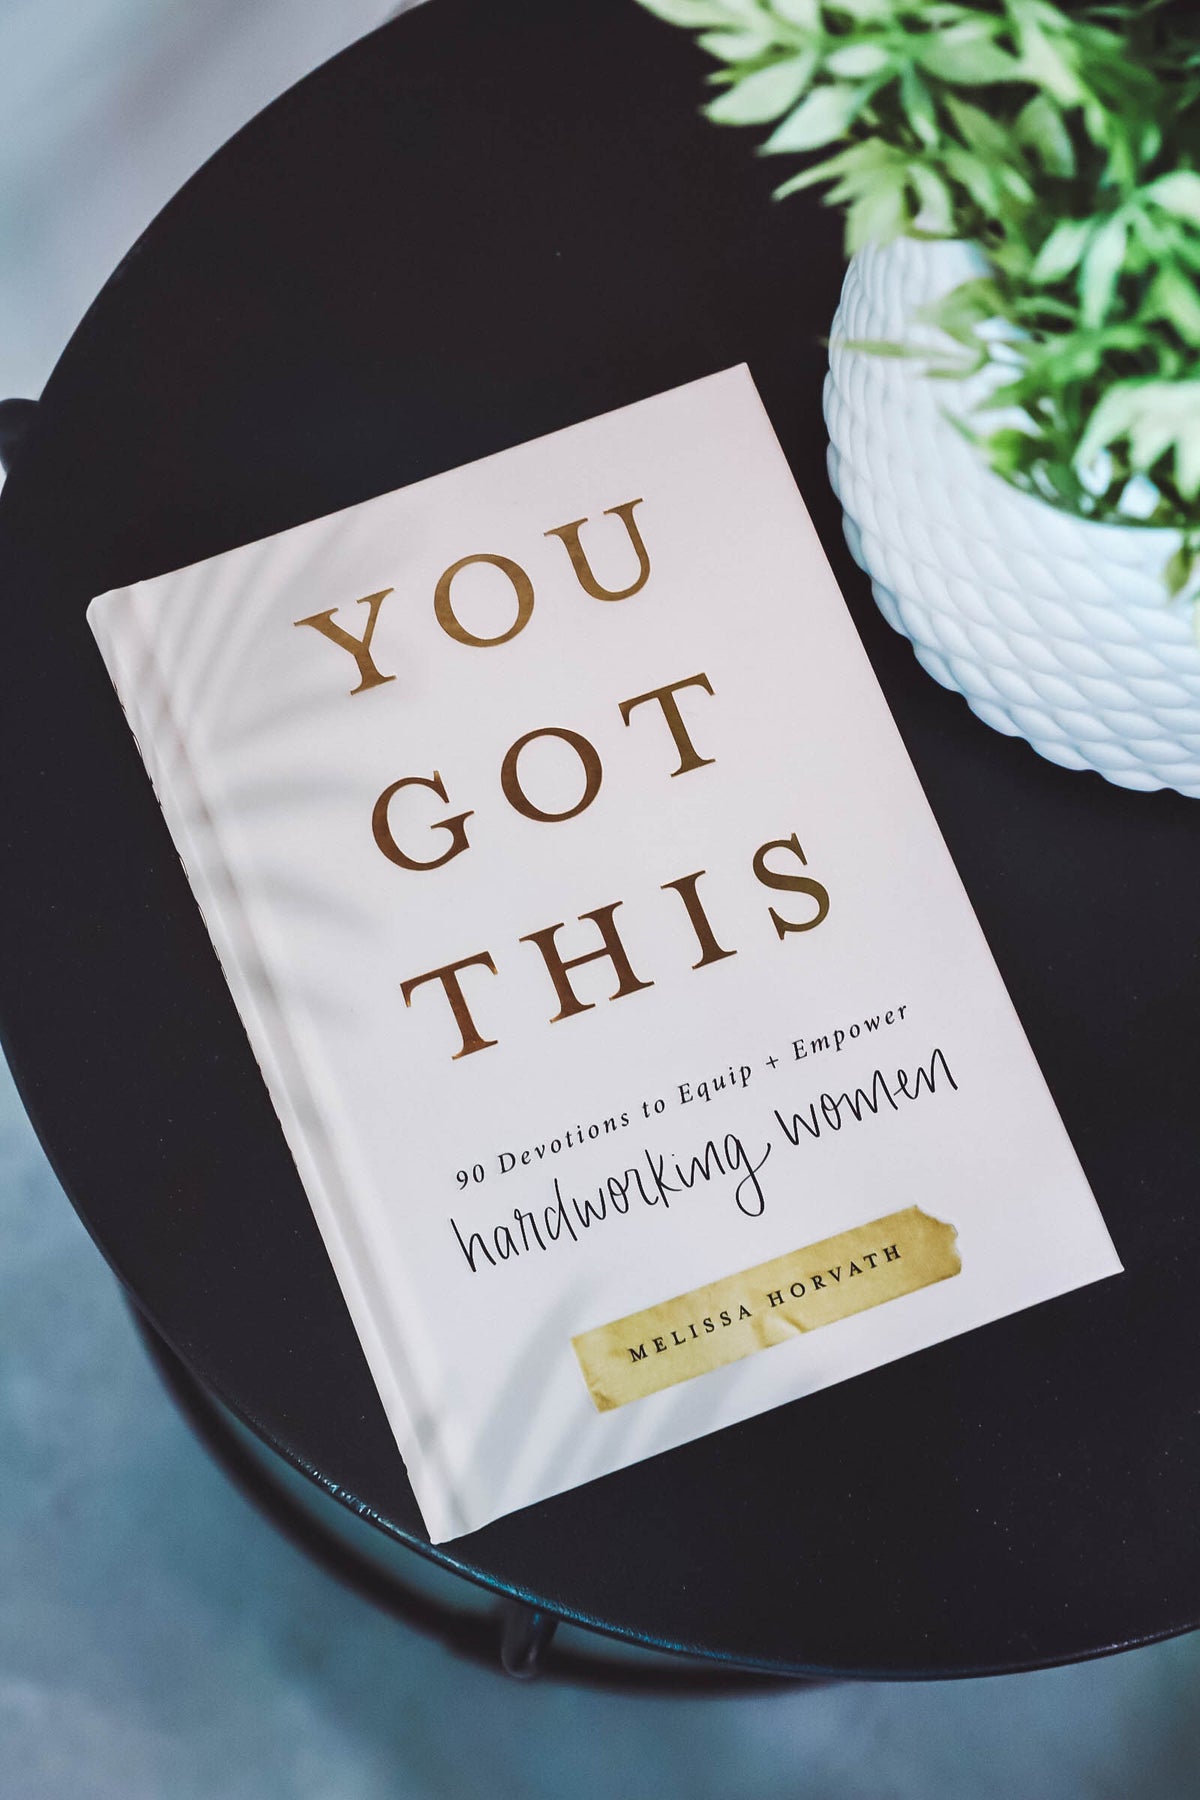 You Got This Devotional by Melissa Horvath